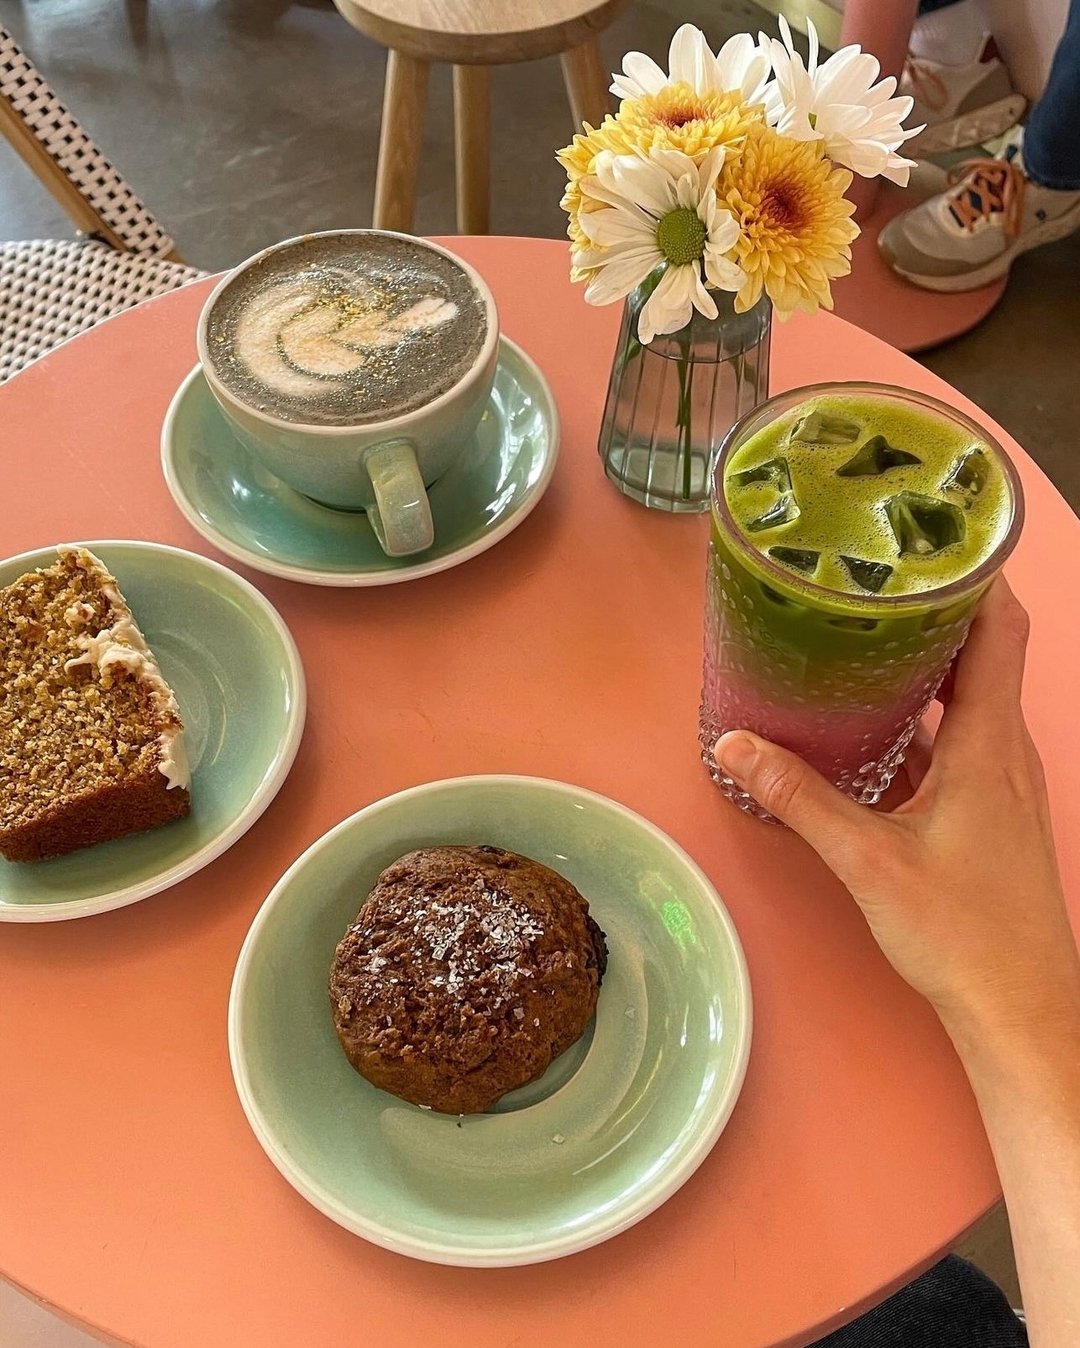 Spring is in full bloom, and so are our lattes and pink matcha delights! ☕️🌸🍵
📸 @thetastyk